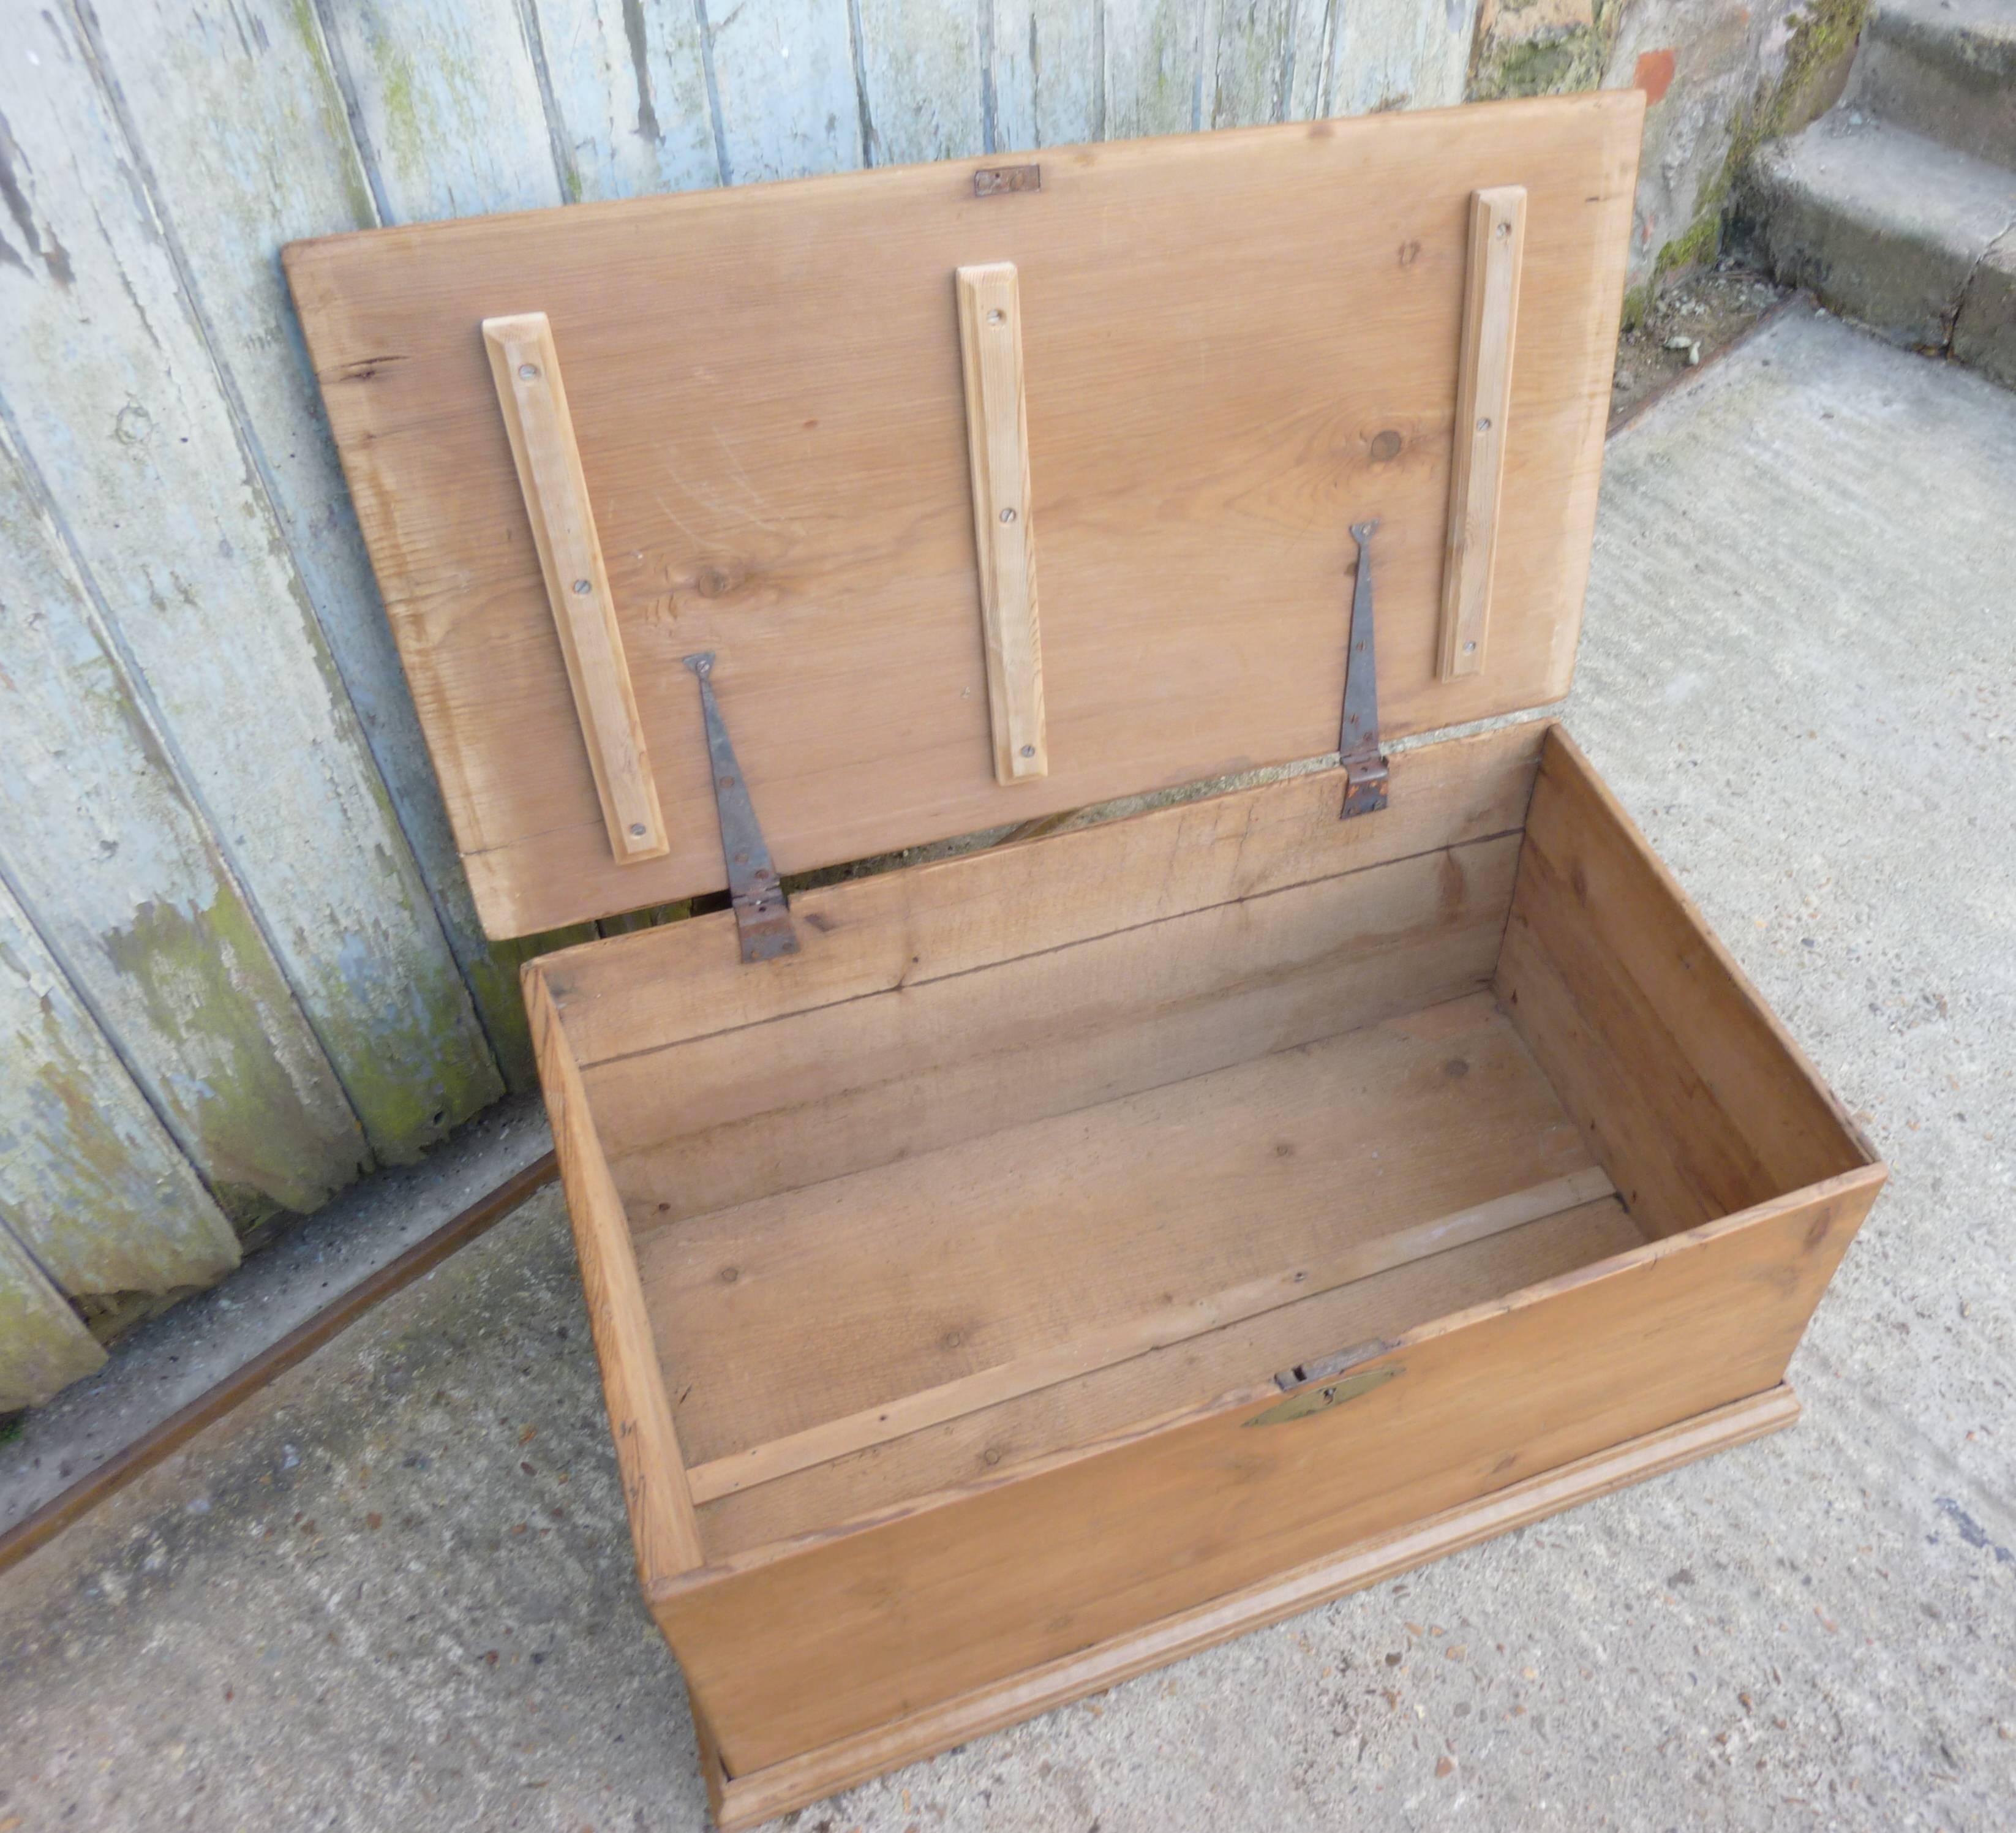 Victorian pine blanket box or coffee table

This good quality little box has a rounded moulded top and is of very solid construction, it has a brass escutcheon and original iron strap hinges and stands on a moulded plinth, the box is in very good